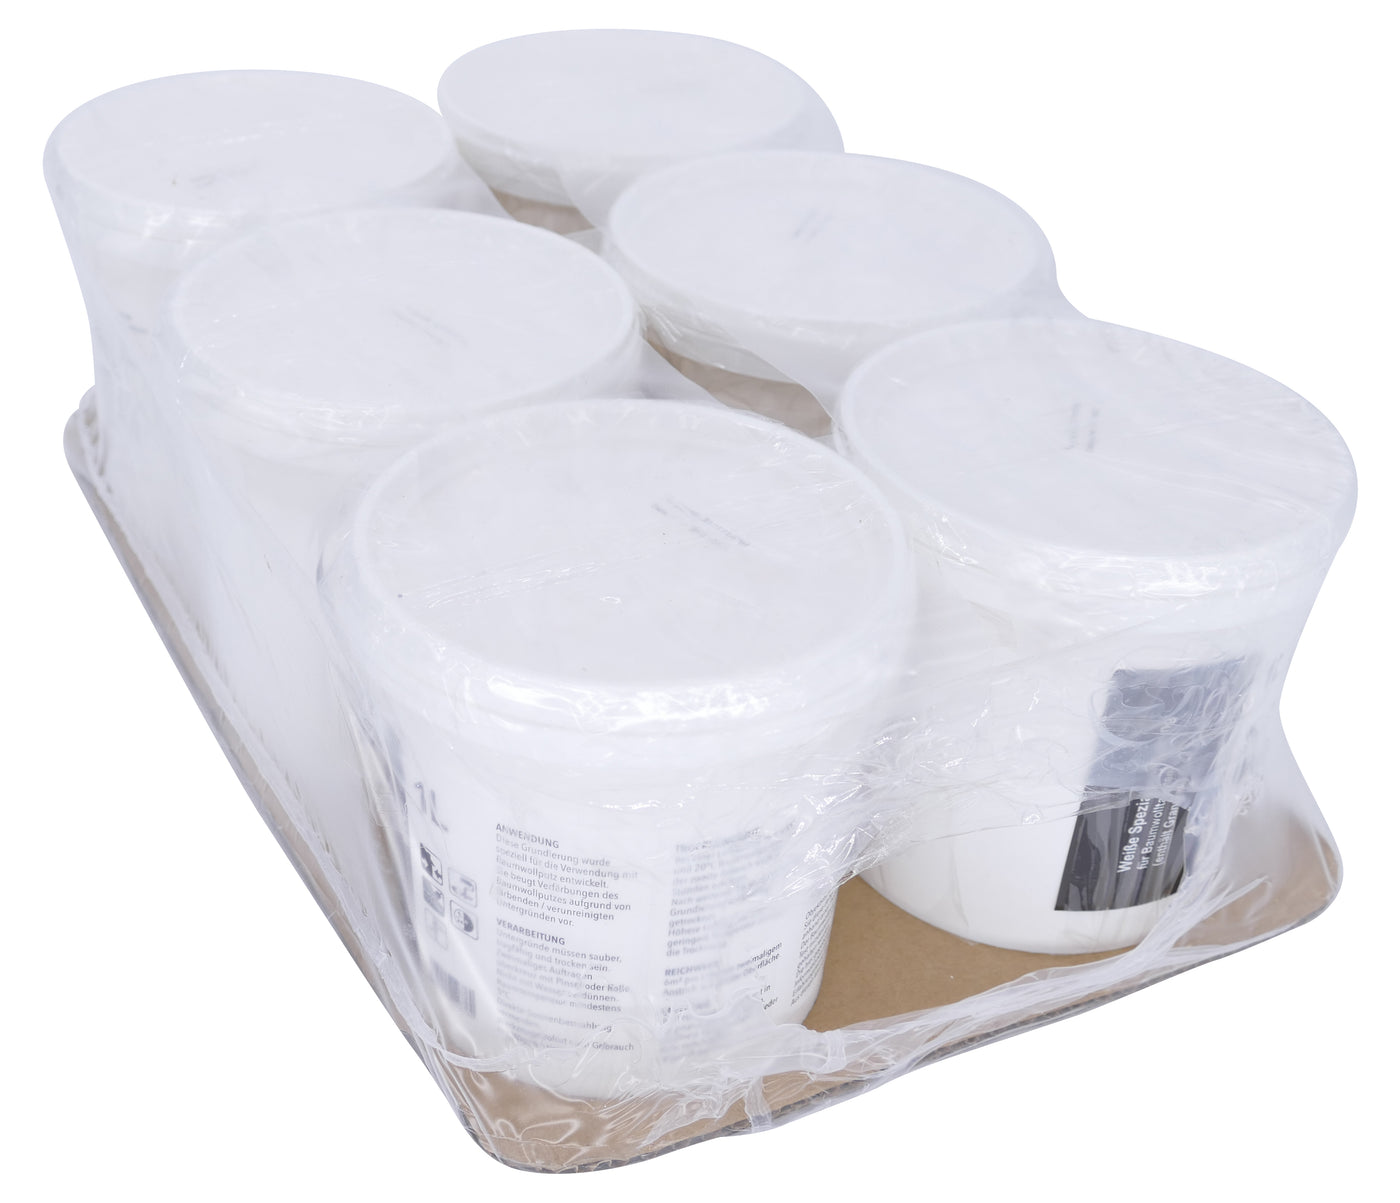 6 cups of insulating paint, each 1 liter, with granules for cotton plaster (coverage of up to 6 m² per liter on non-absorbent surfaces)